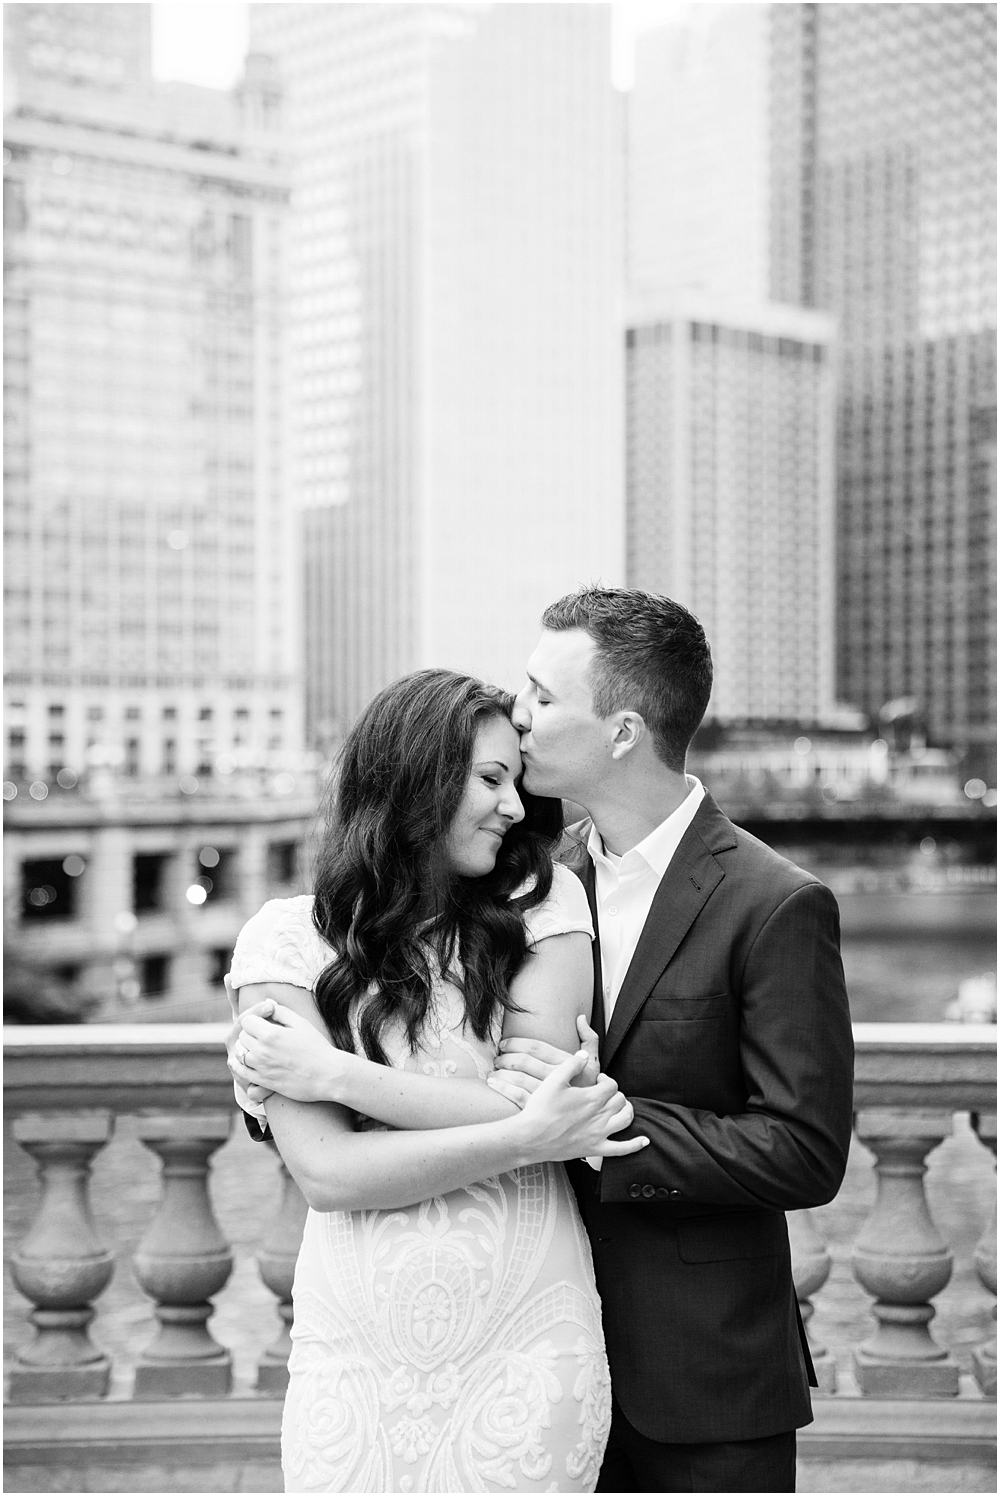 City chic Chicago engagement session at North Avenue Beach and the Wrigley Building